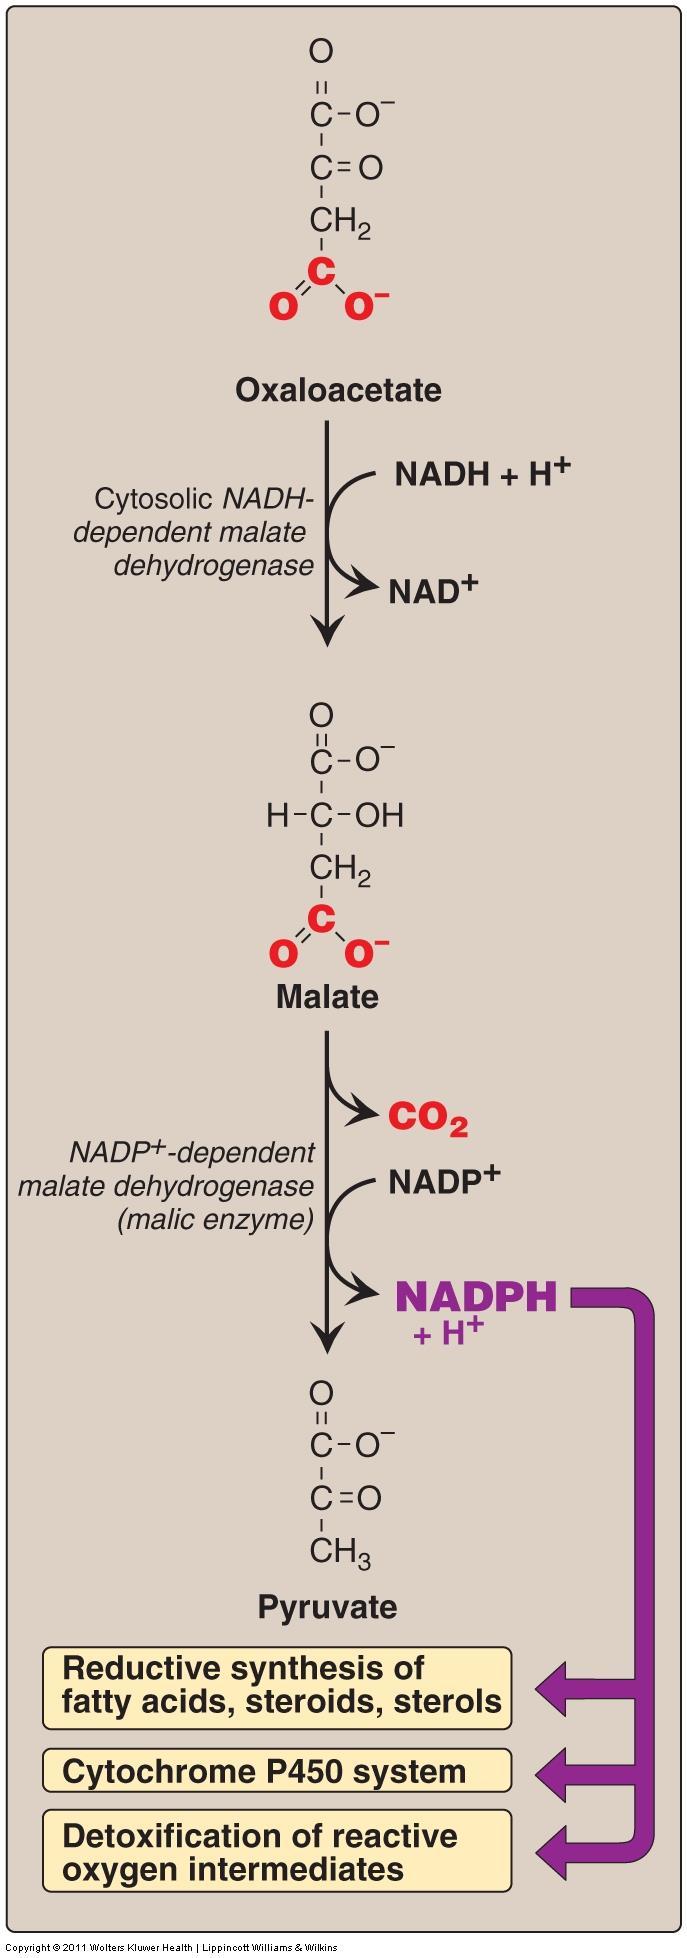 De novo synthesis of Fatty Acids D. Major sources of the NADPH required for fatty acid synthesis NADPH produced from: two source of NADPH, 1.